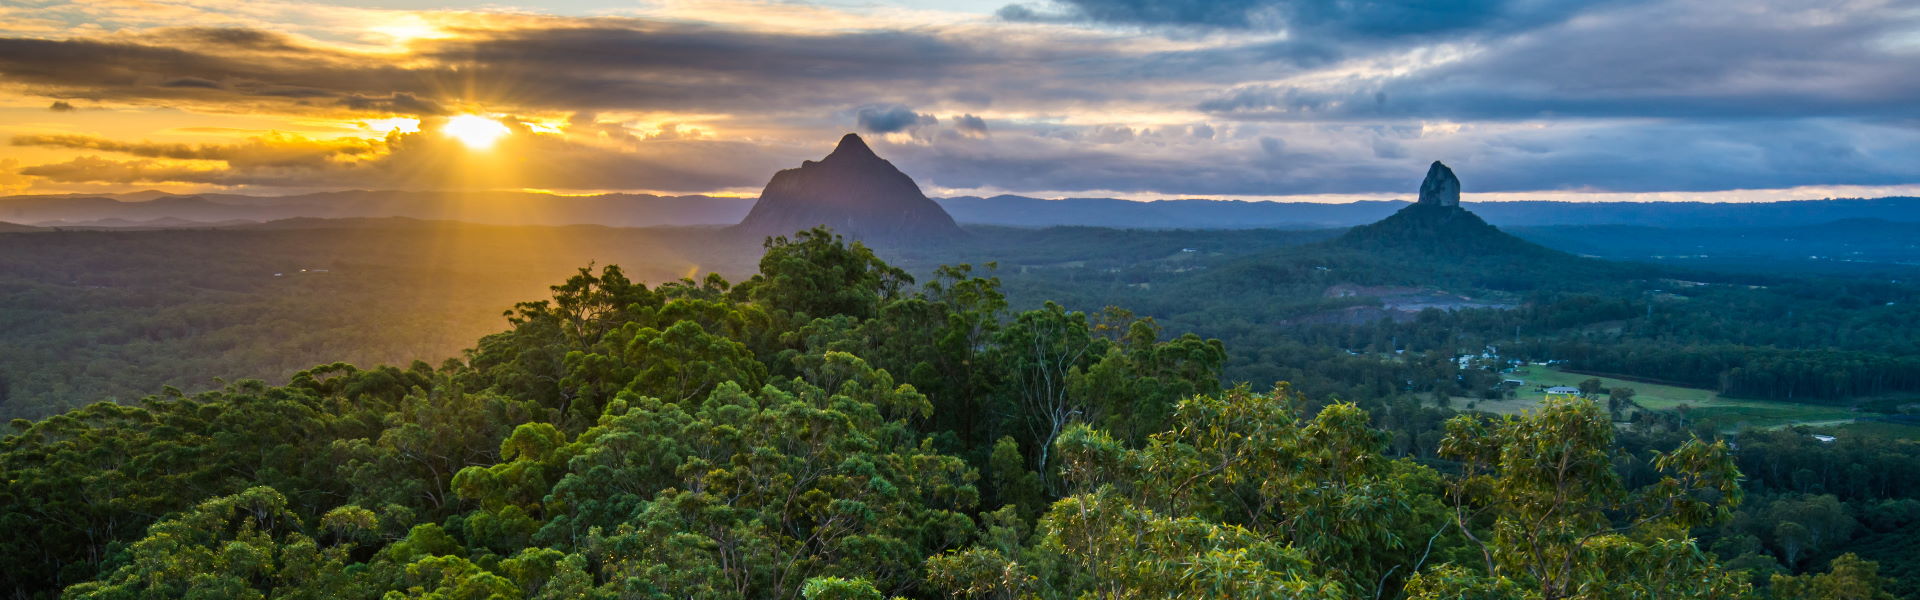 Image showing a sunset view of the Glasshouse Mountains